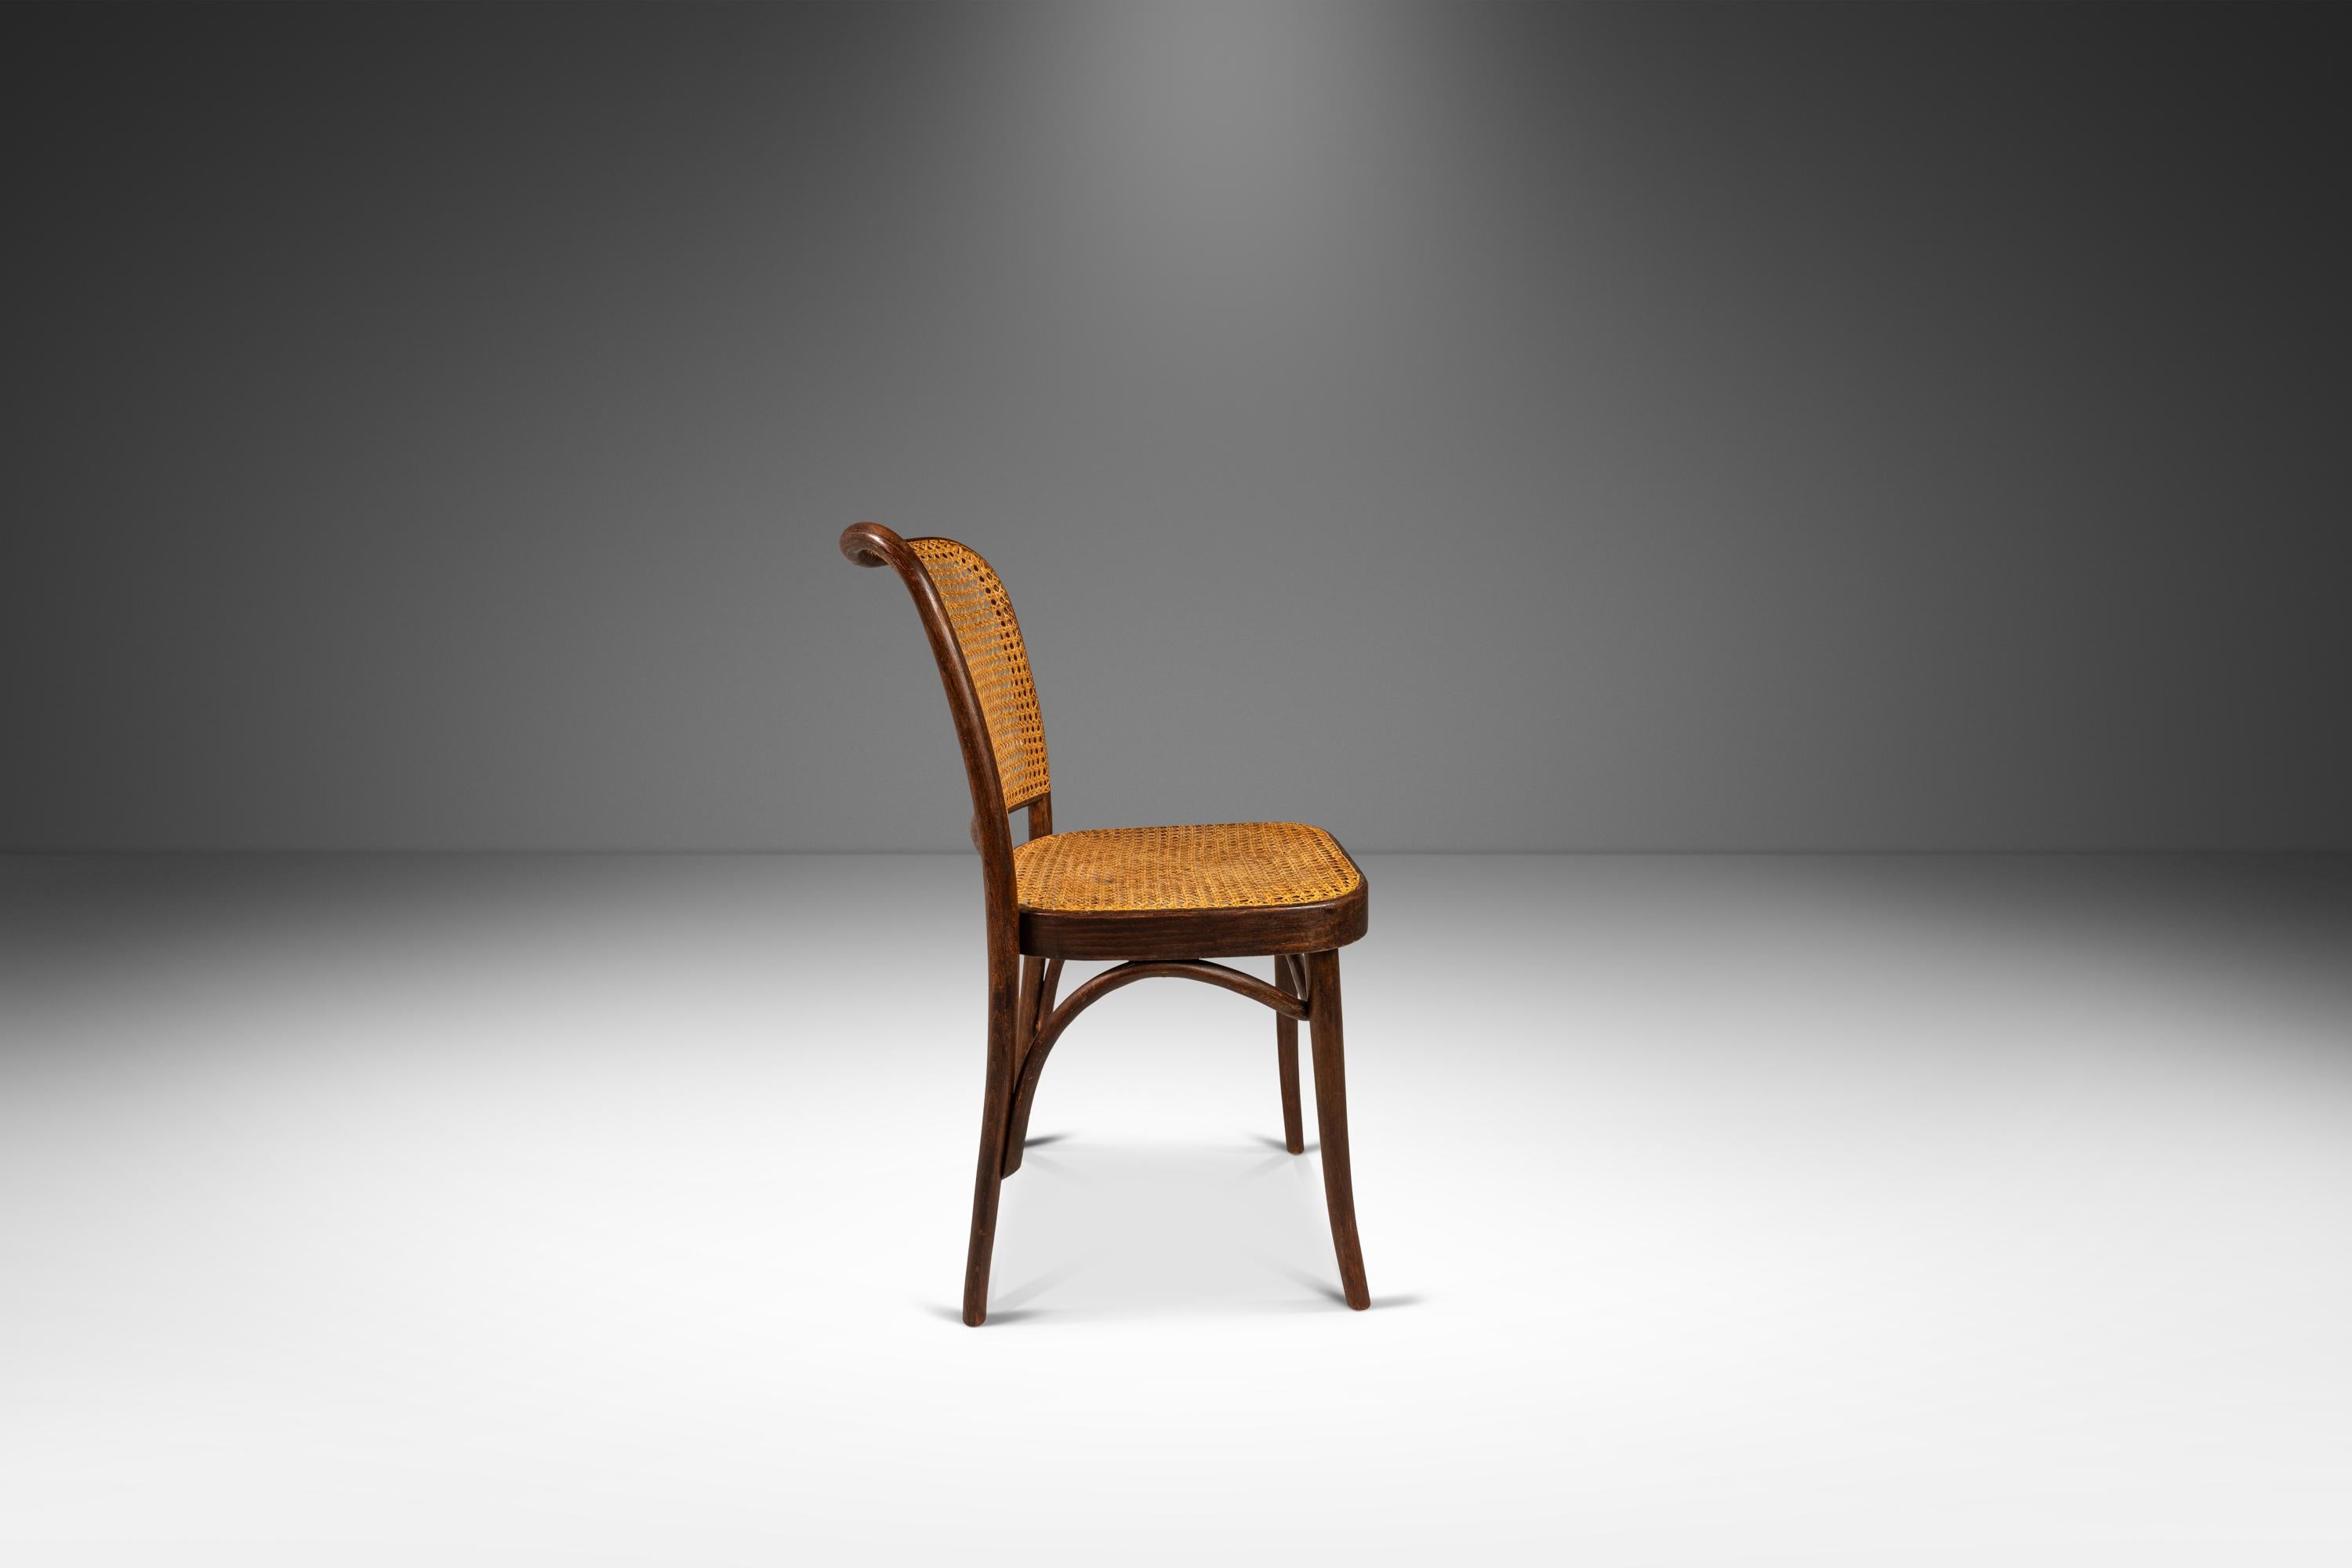 Polish Bentwood Prague Model 811 Chair in Walnut by Josef Frank, Poland, c. 1960s For Sale